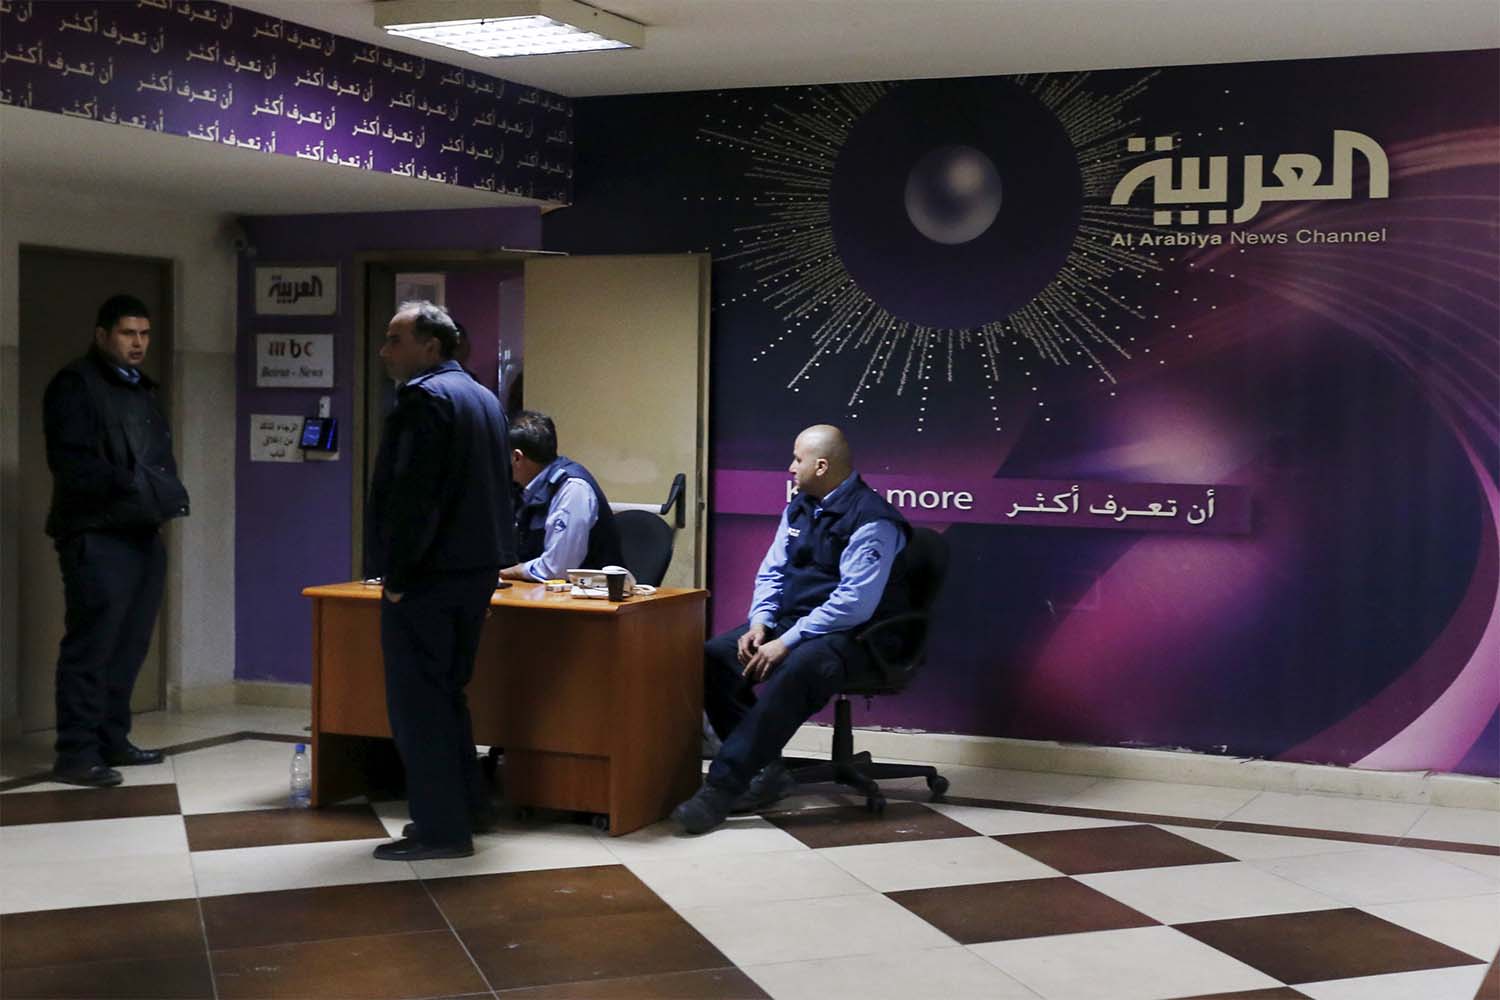 It could take up to two years for Al Arabiya to complete the relocation